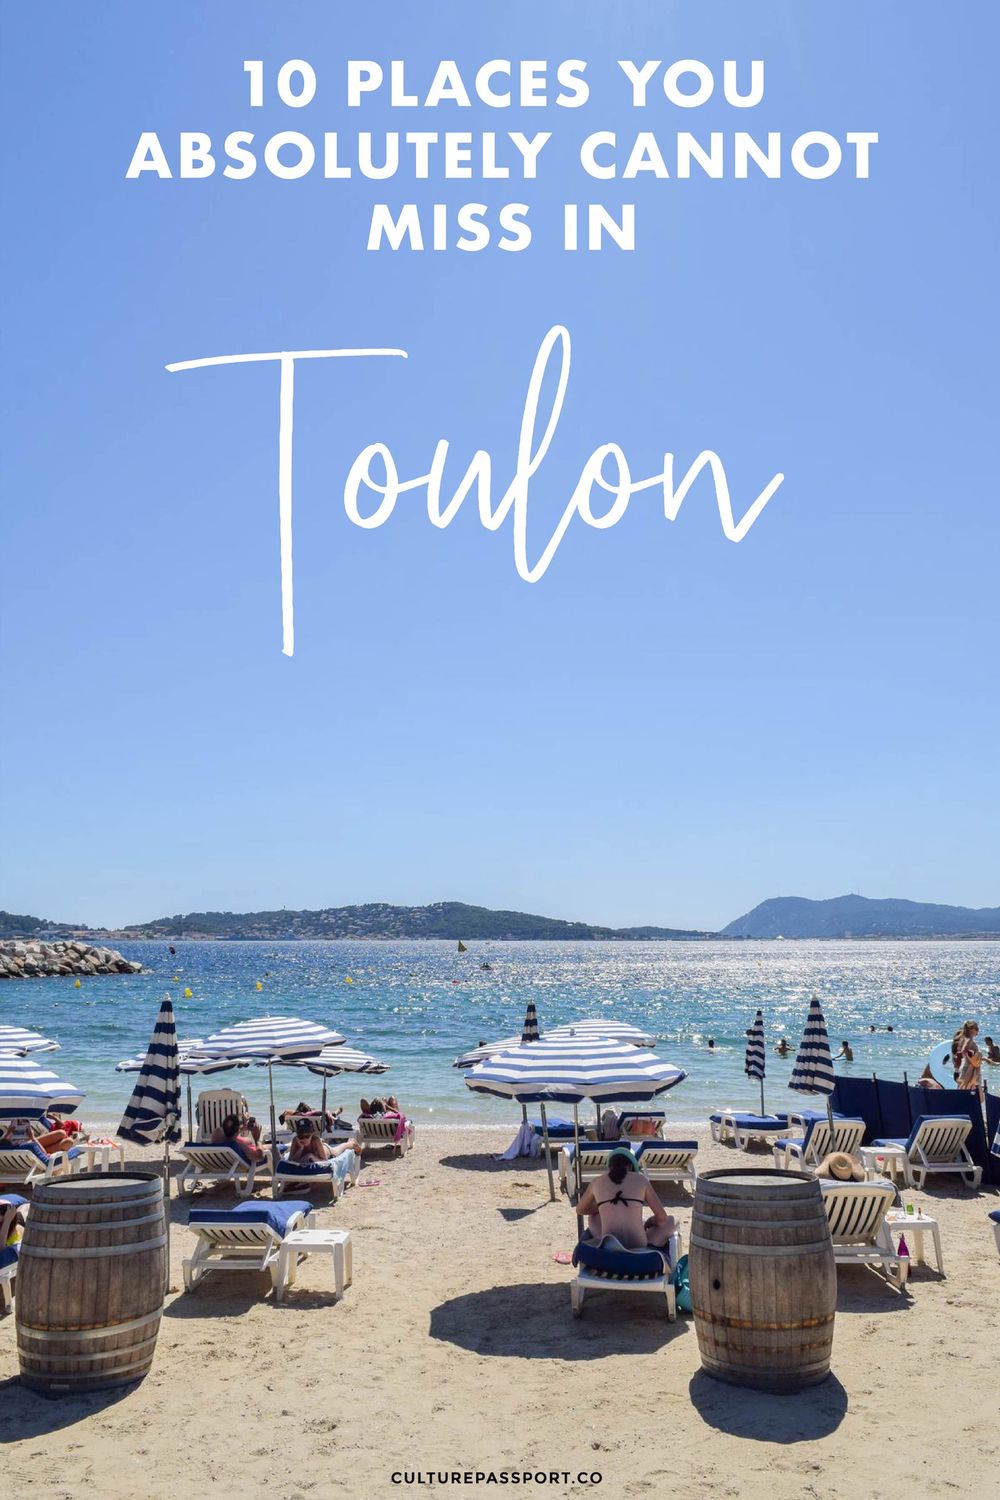 10 Places You Absolutely Cannot Miss In Toulon, France!